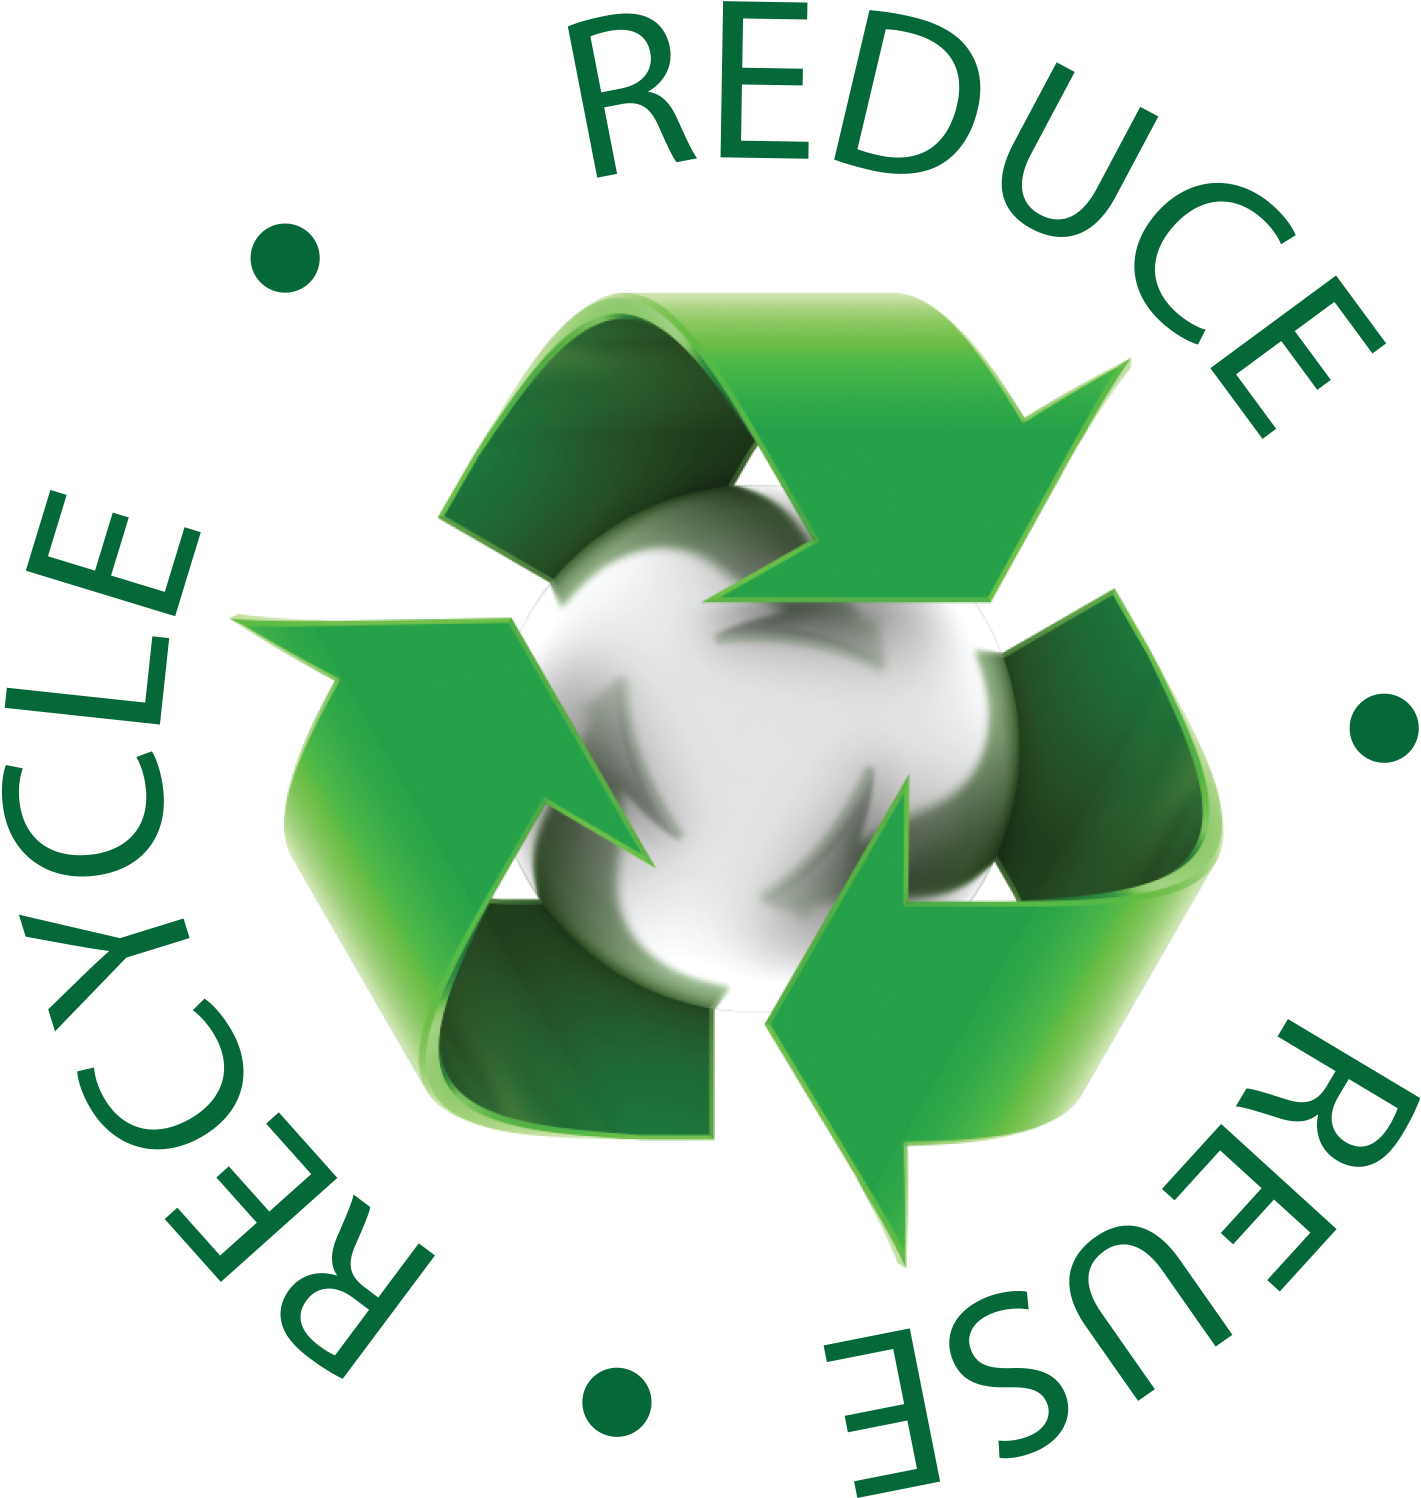 Reduce Reuse Recycle Symbol - Recycle Reduce Reuse Symbol (1563x1594)